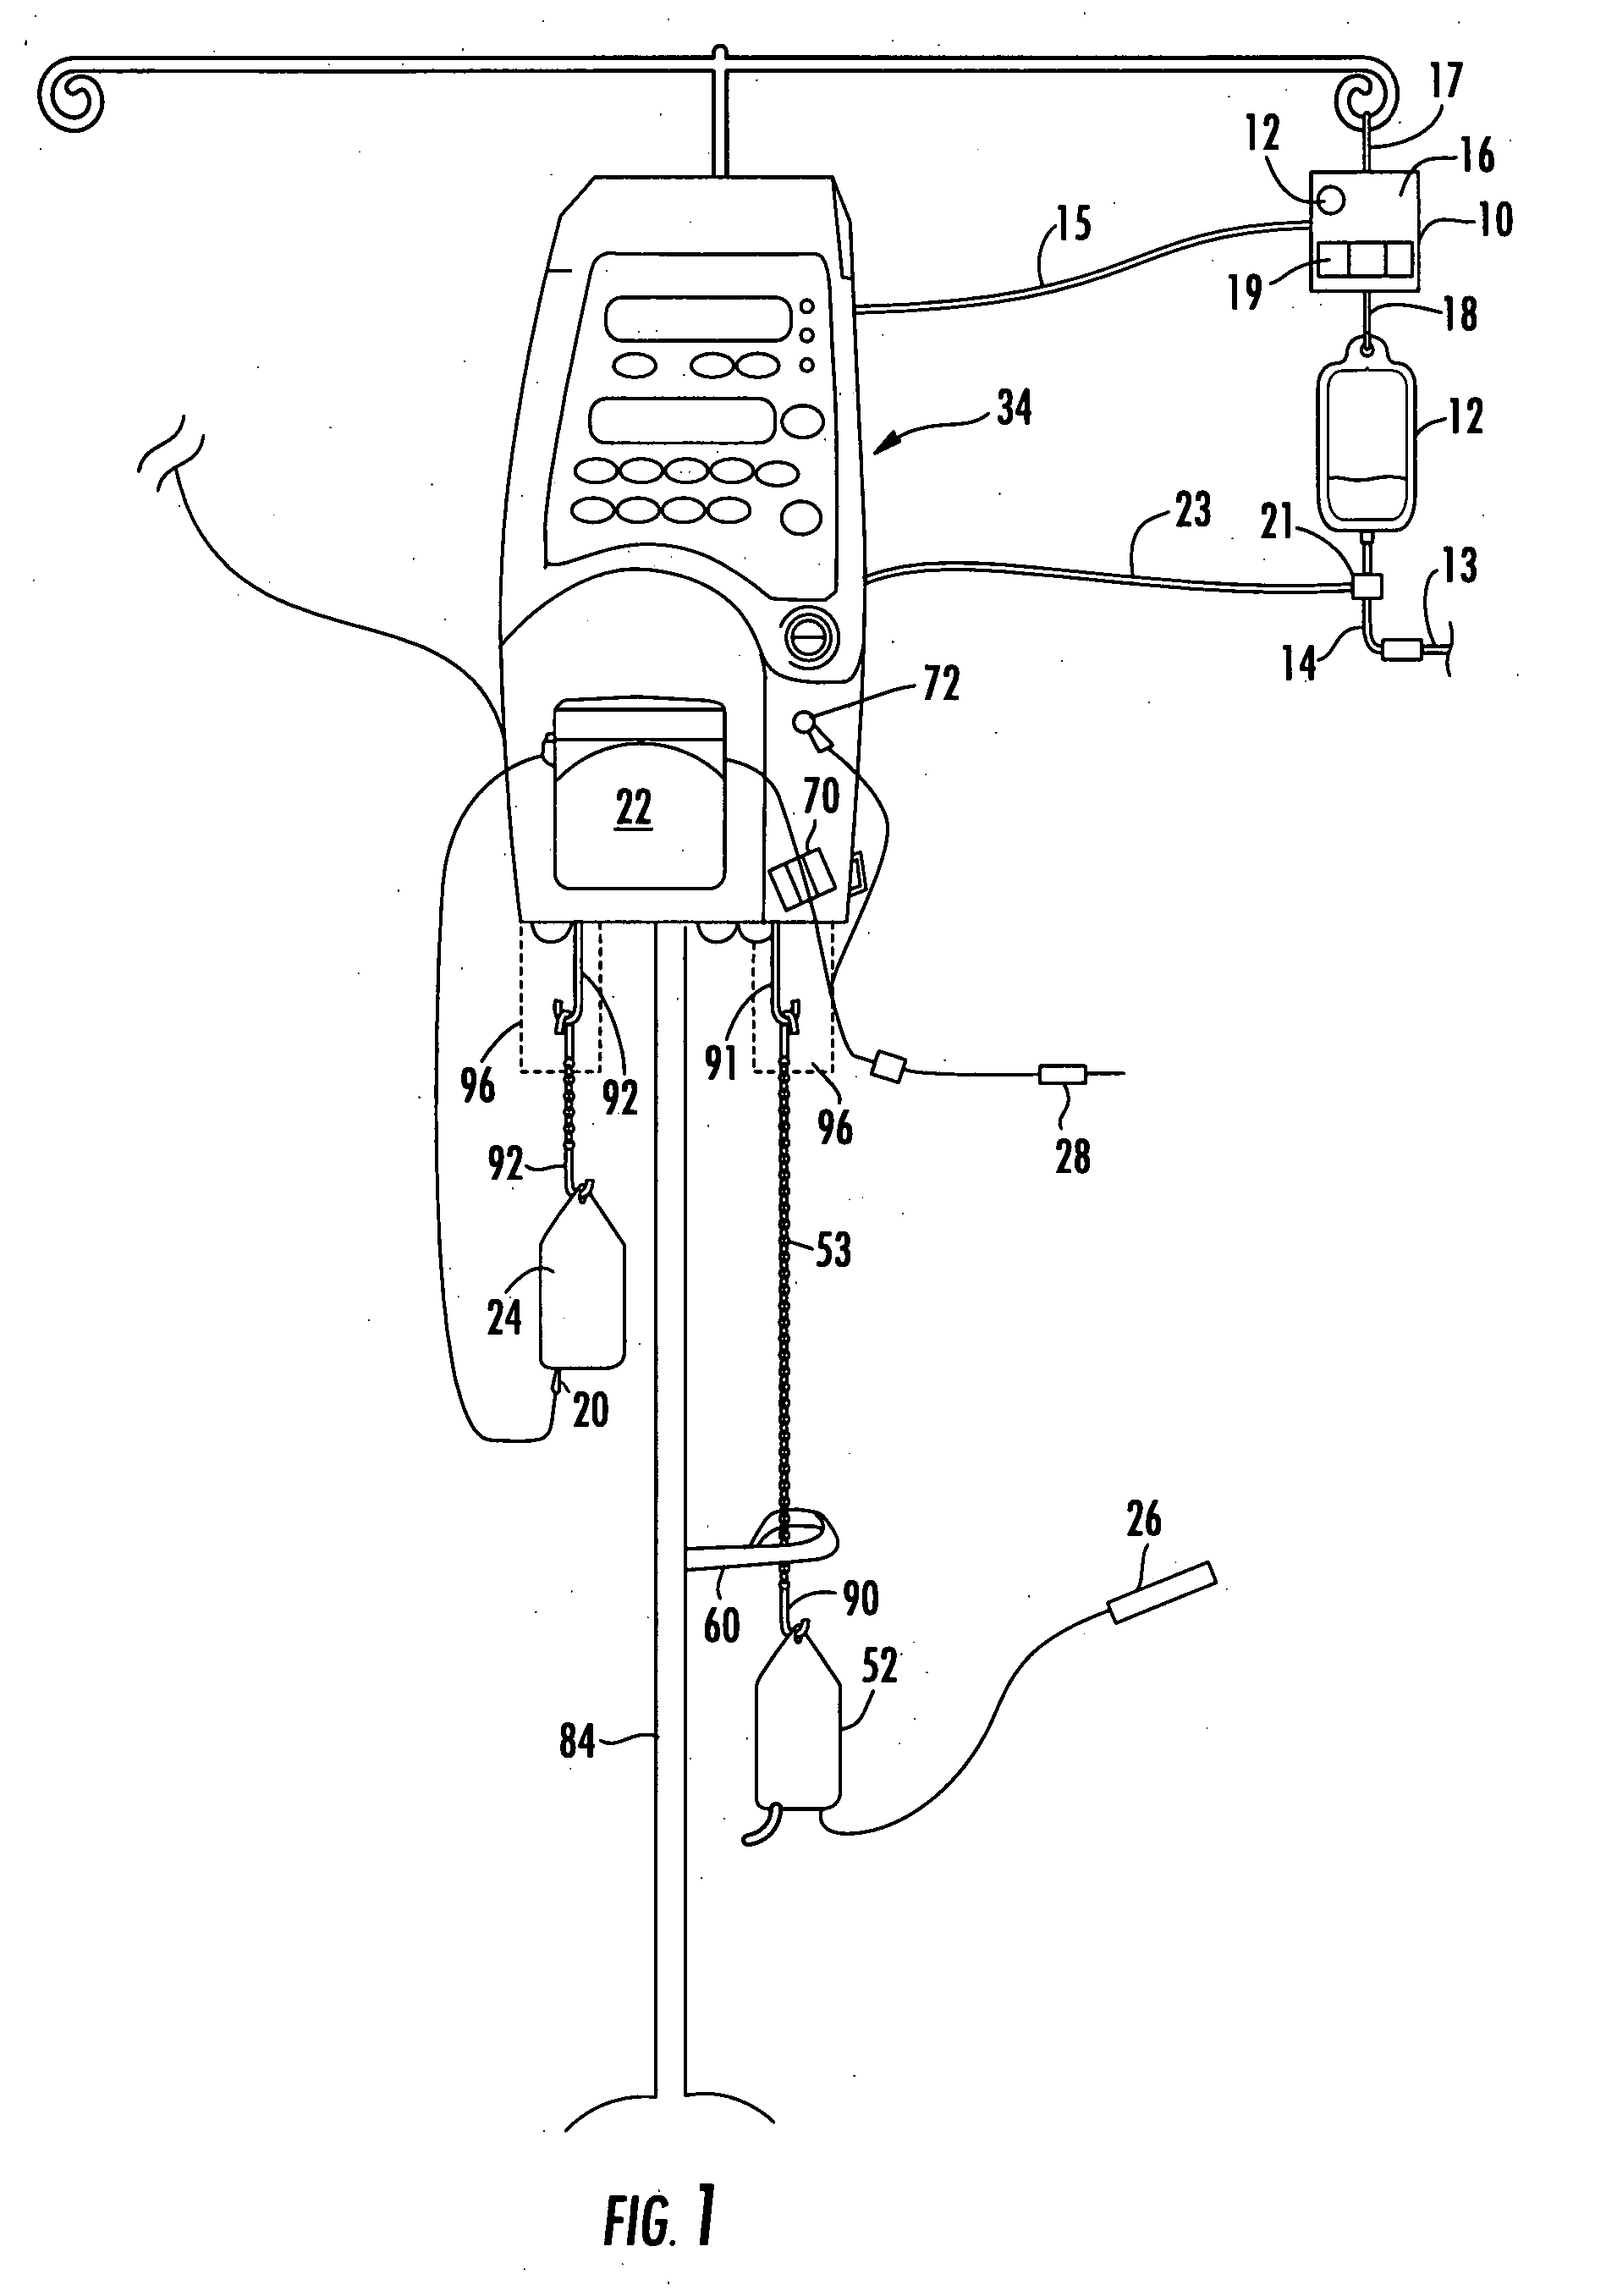 Patient hydration/fluid administration system and method